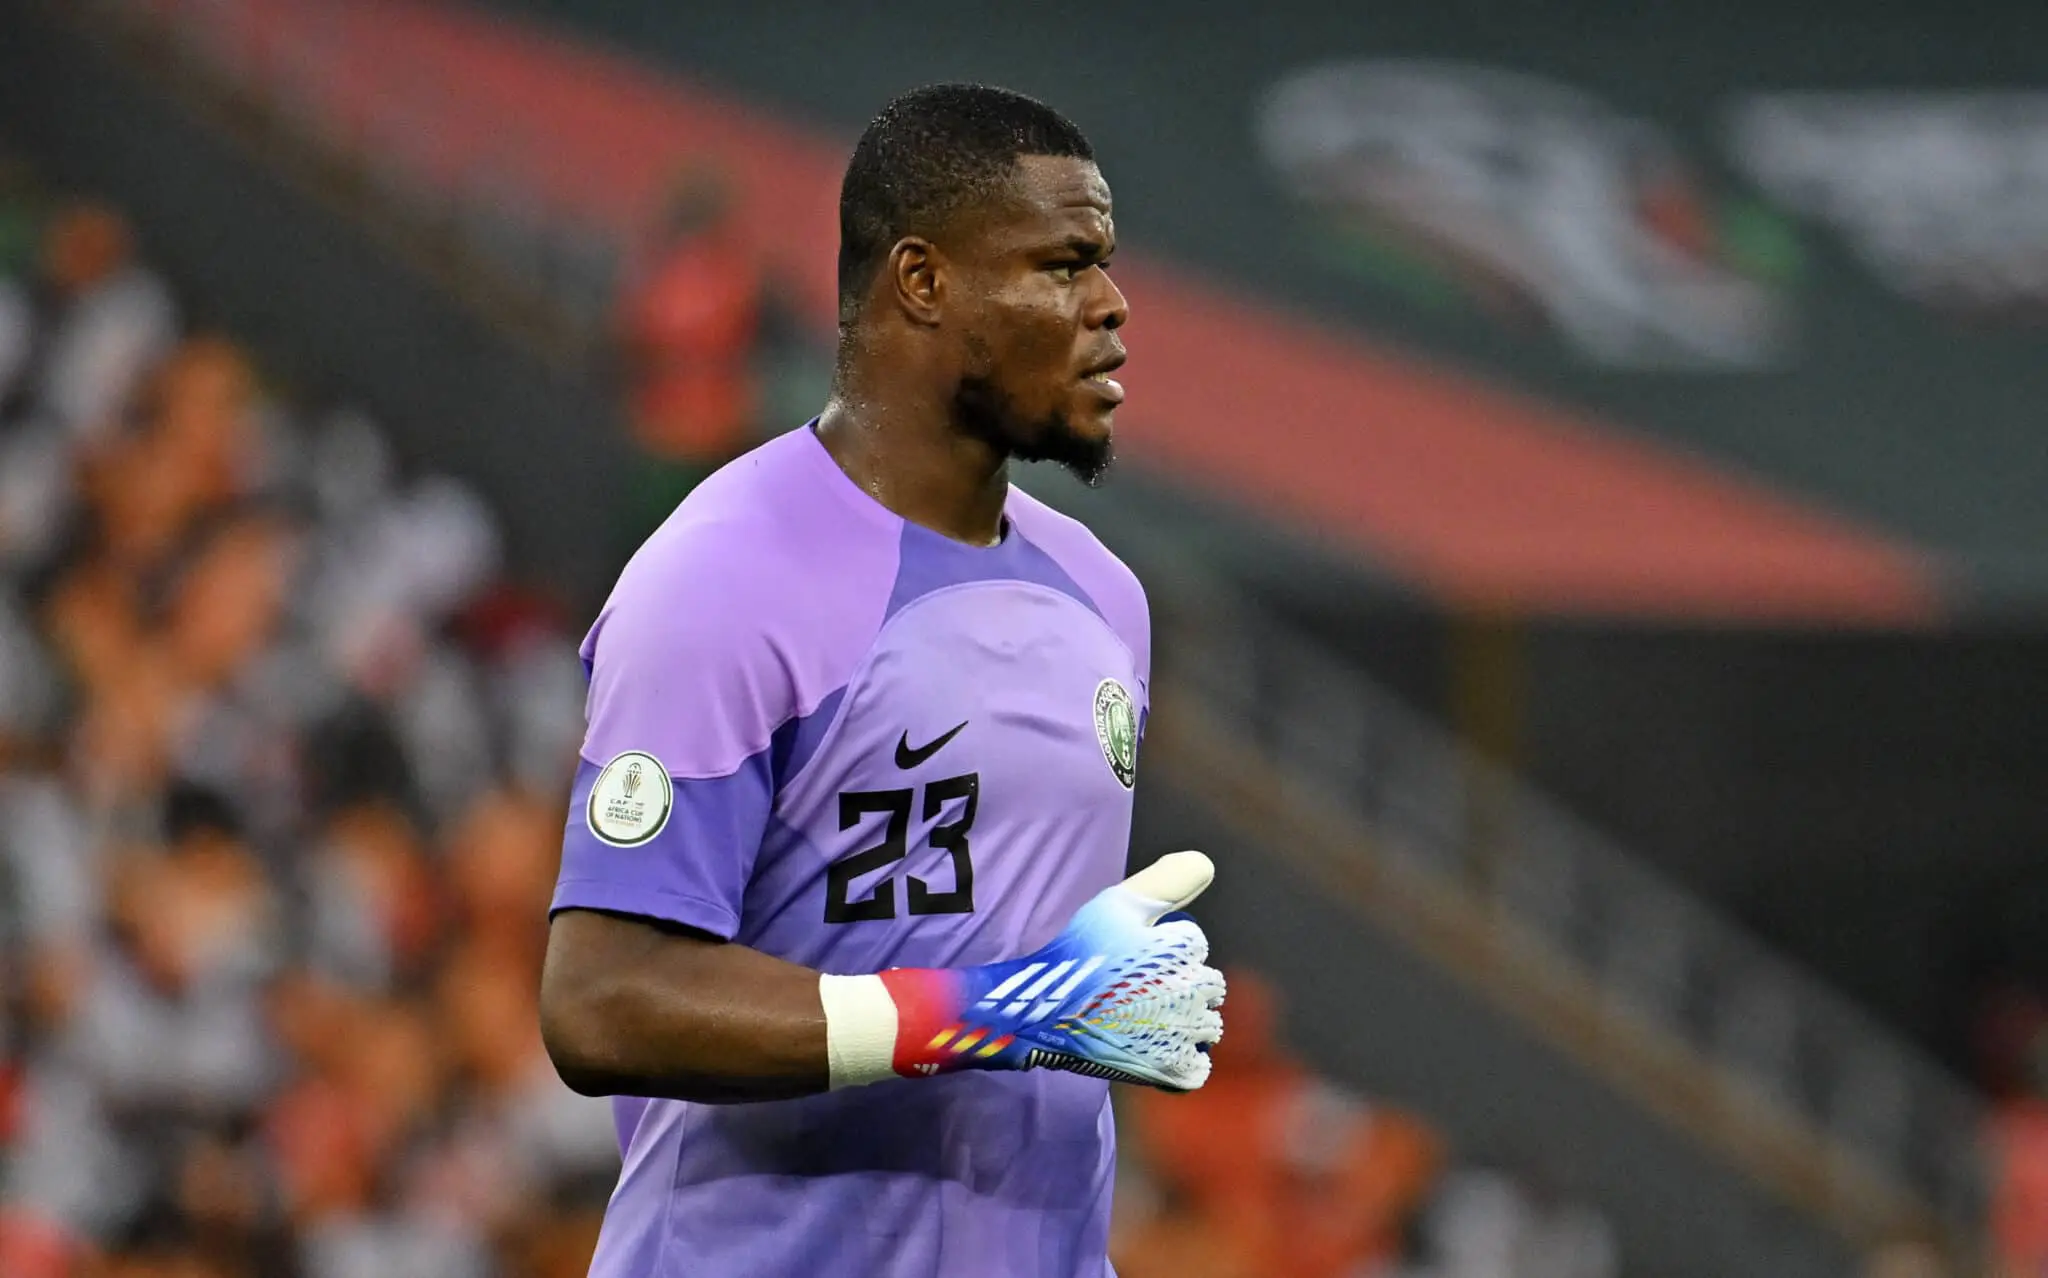 NANS threatens South African businesses in Nigeria over threat to Eagles goalkeeper Nwabali